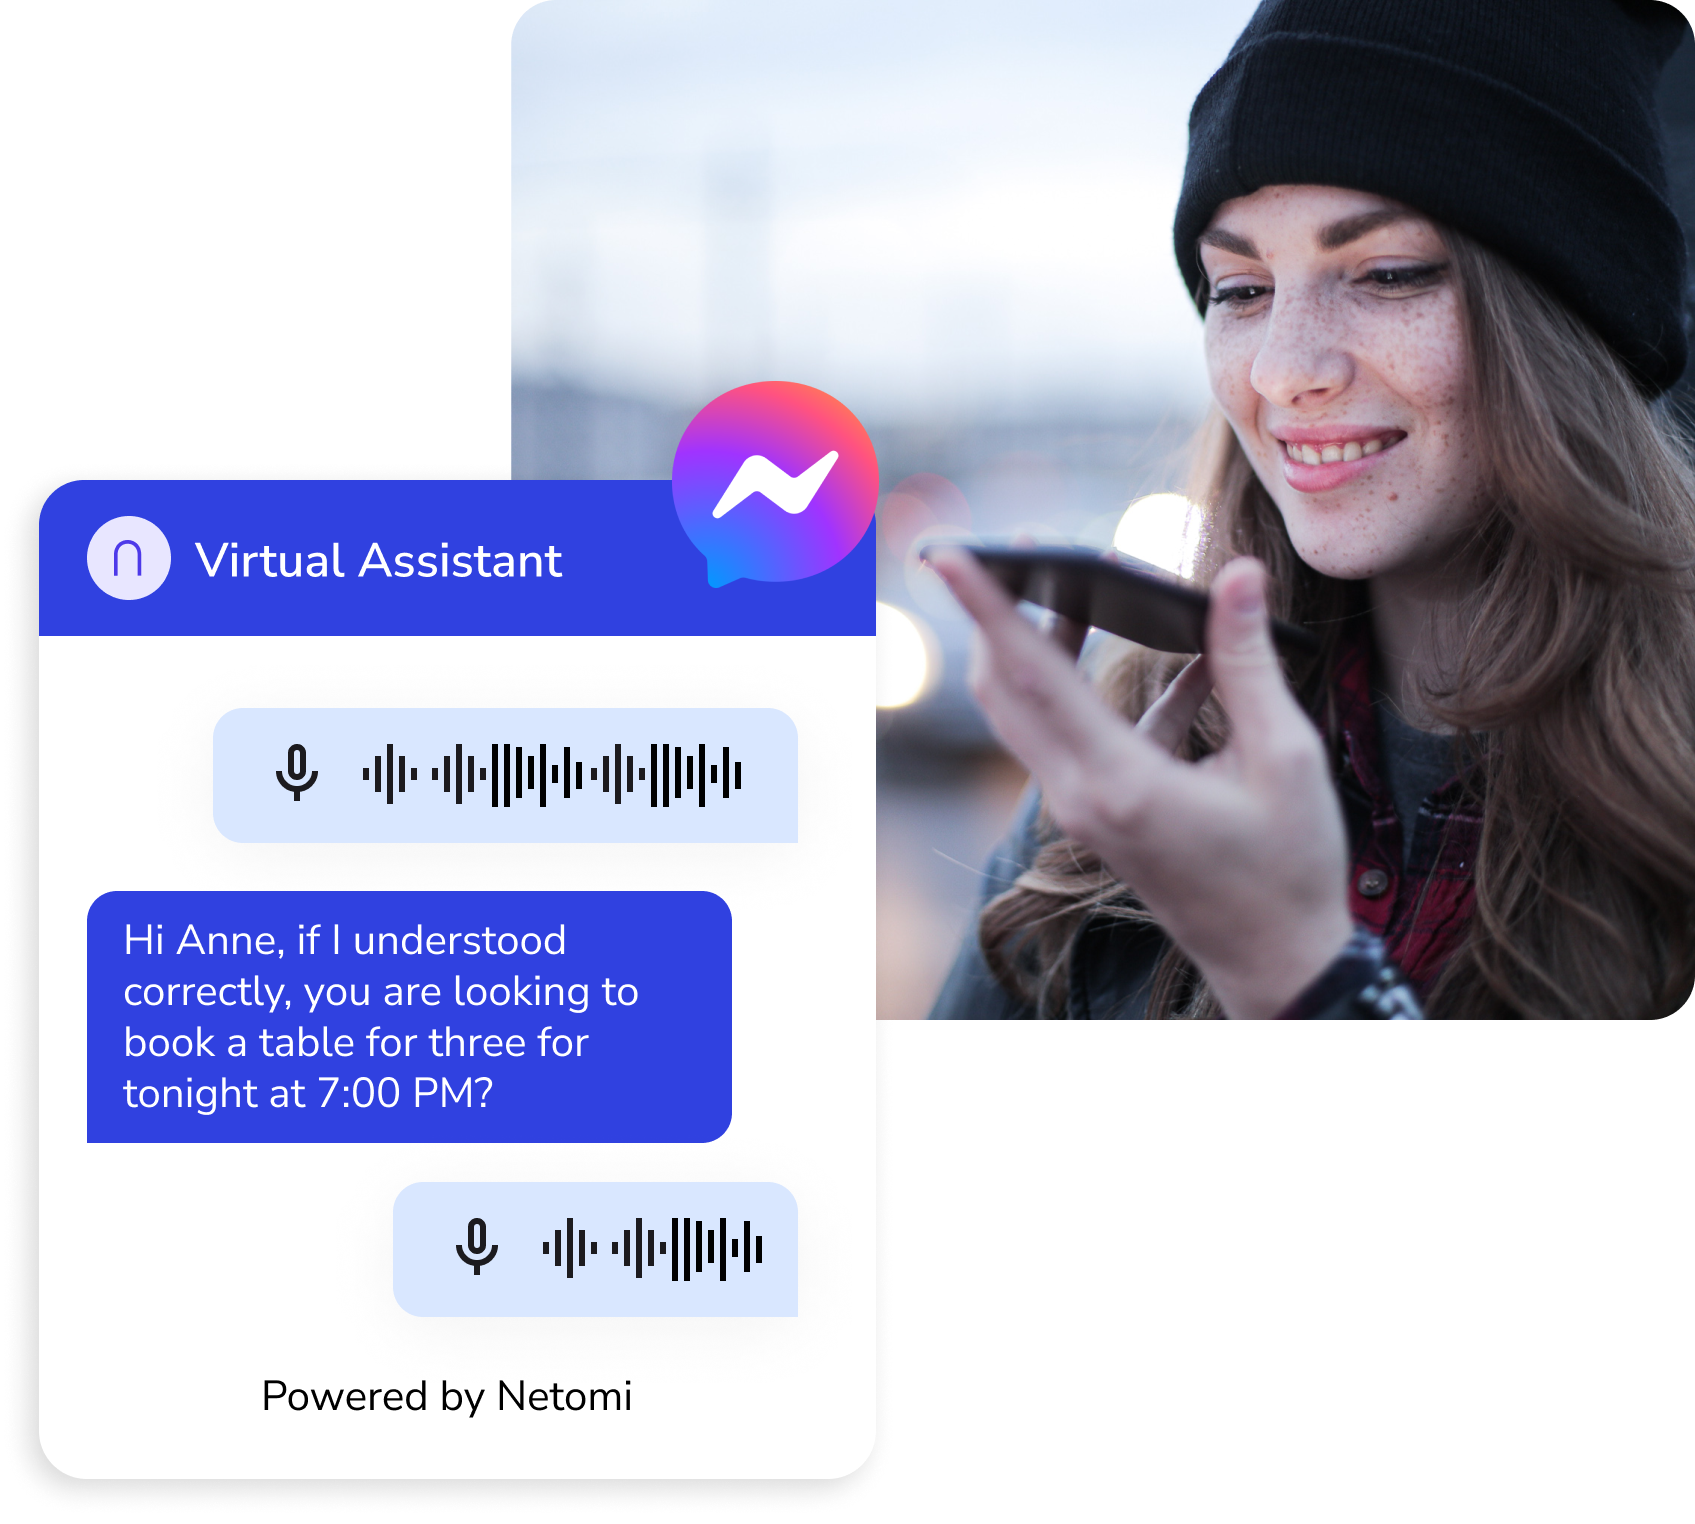 AI Customer Support integrated with voice functionality